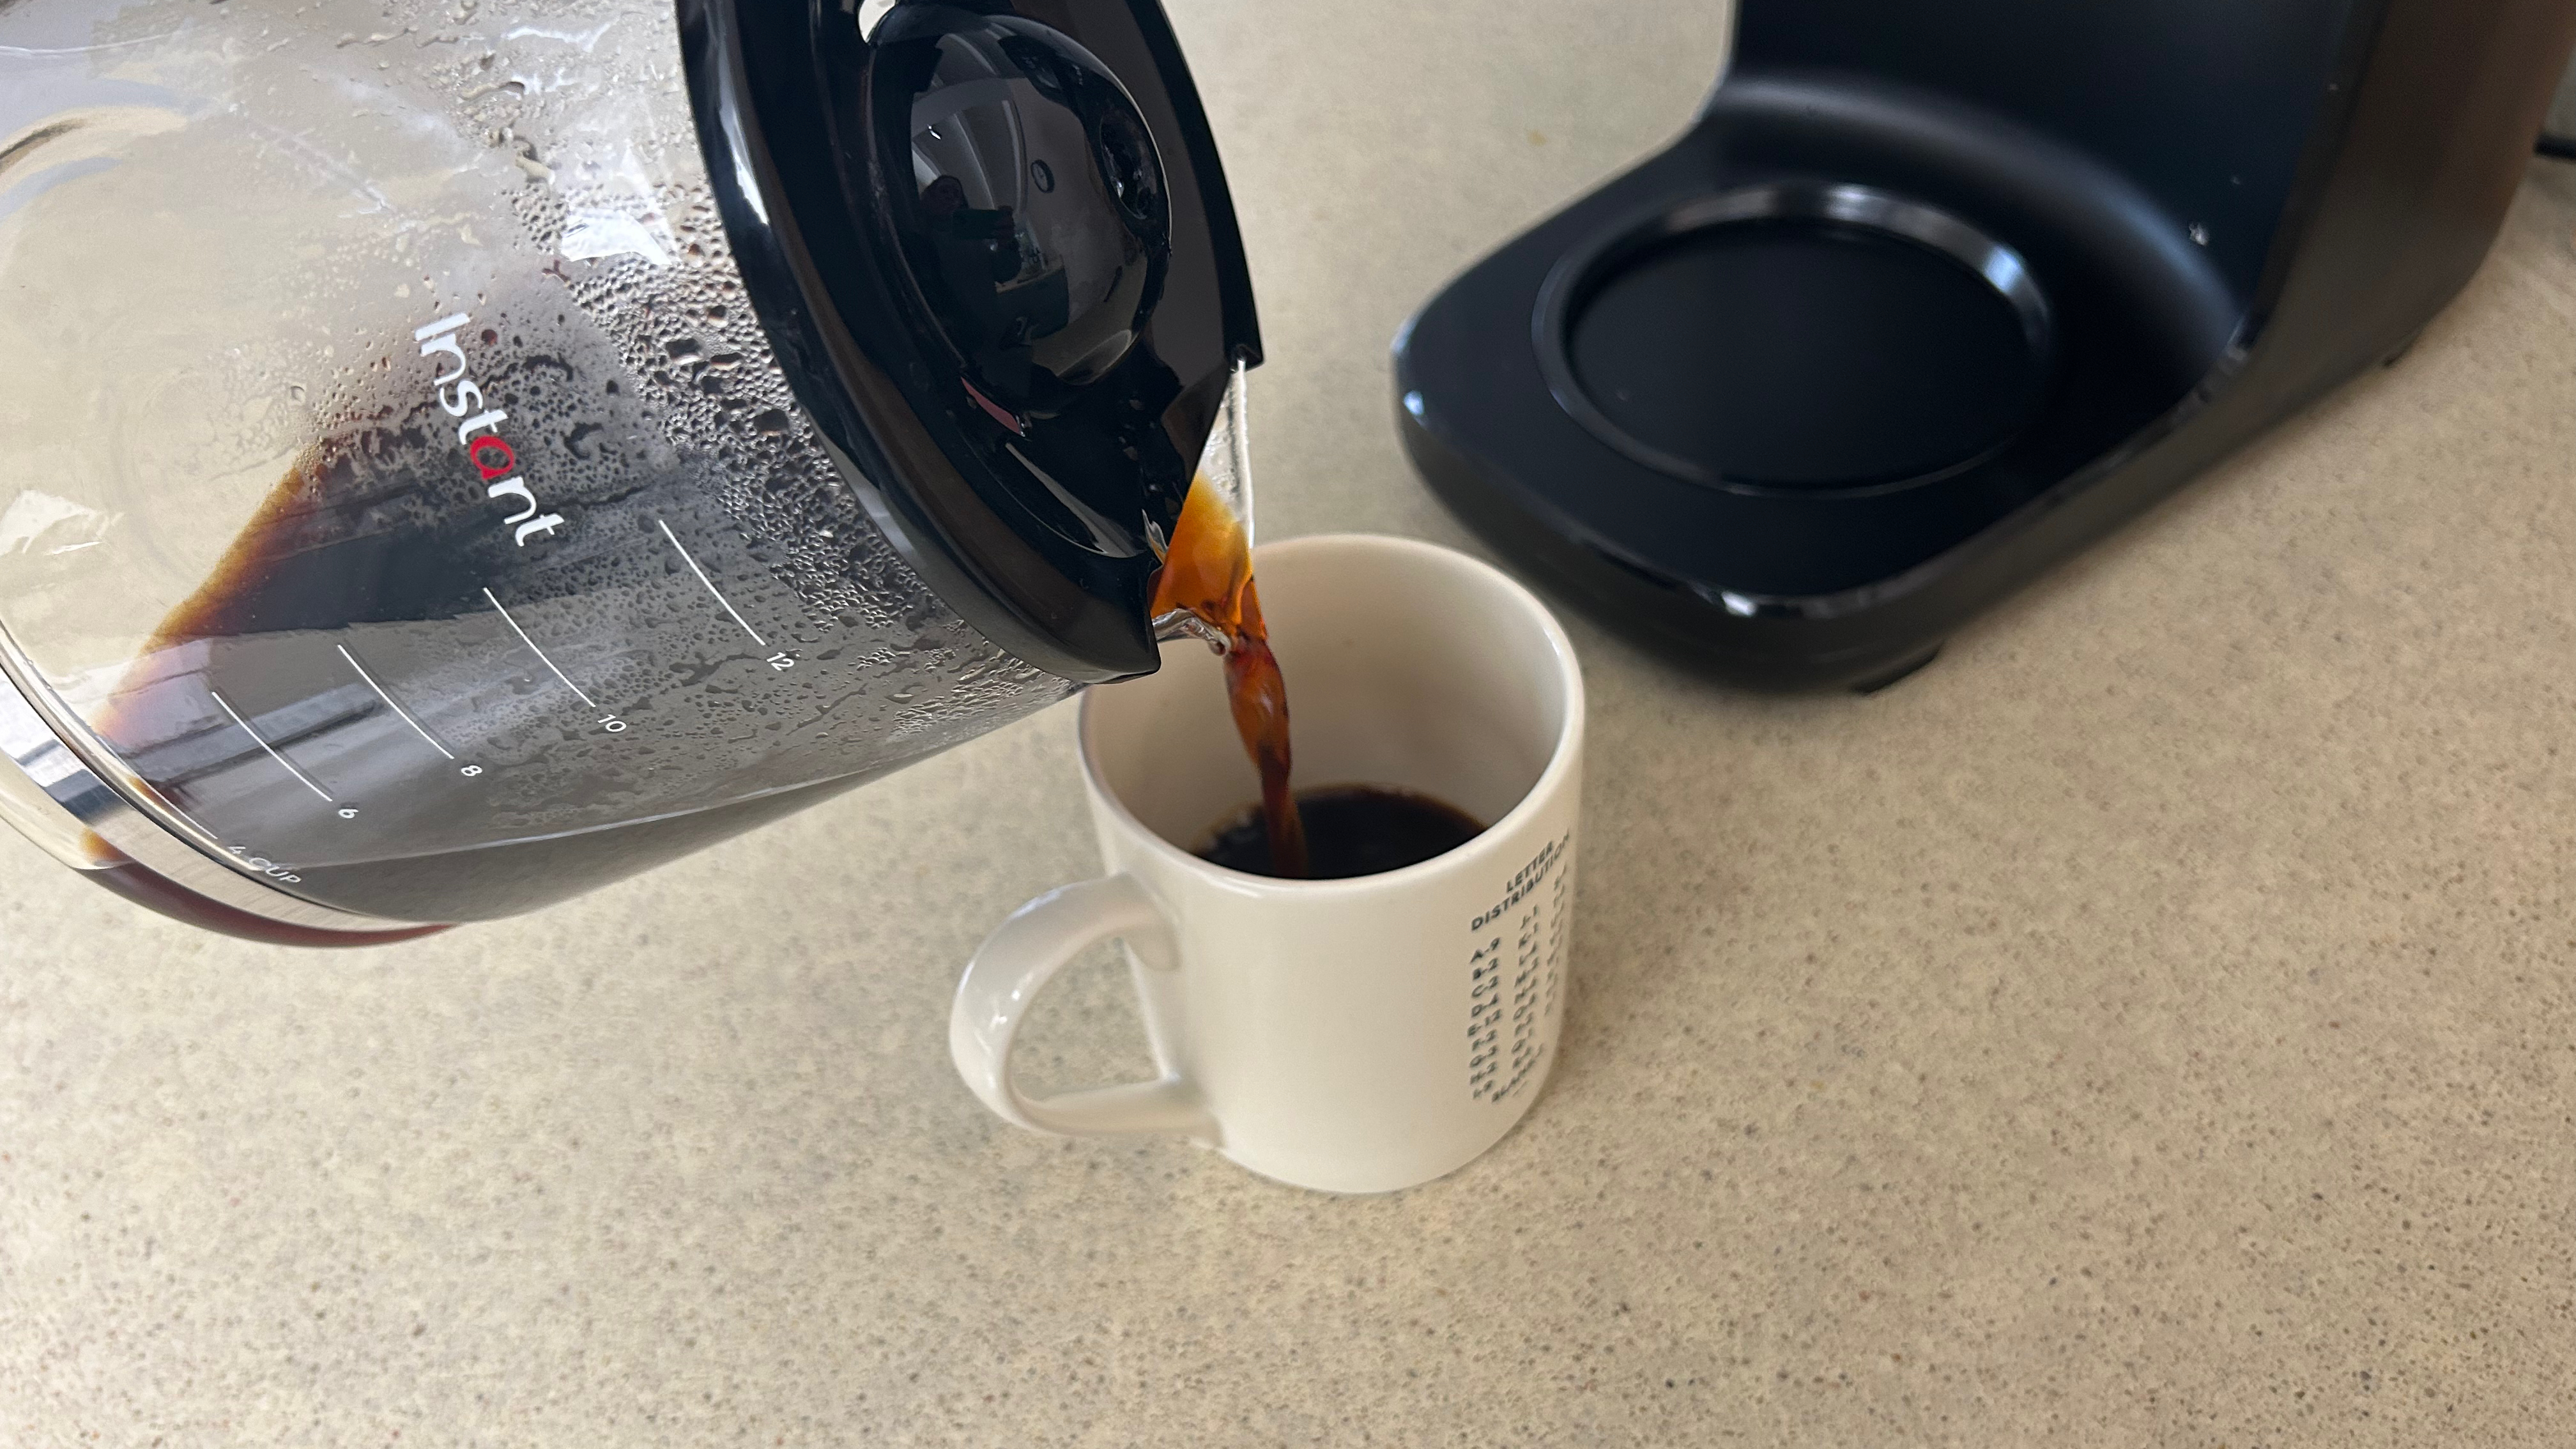 amazon, instant infusion brew 12-cup coffee maker review: a simple and affordable coffee maker